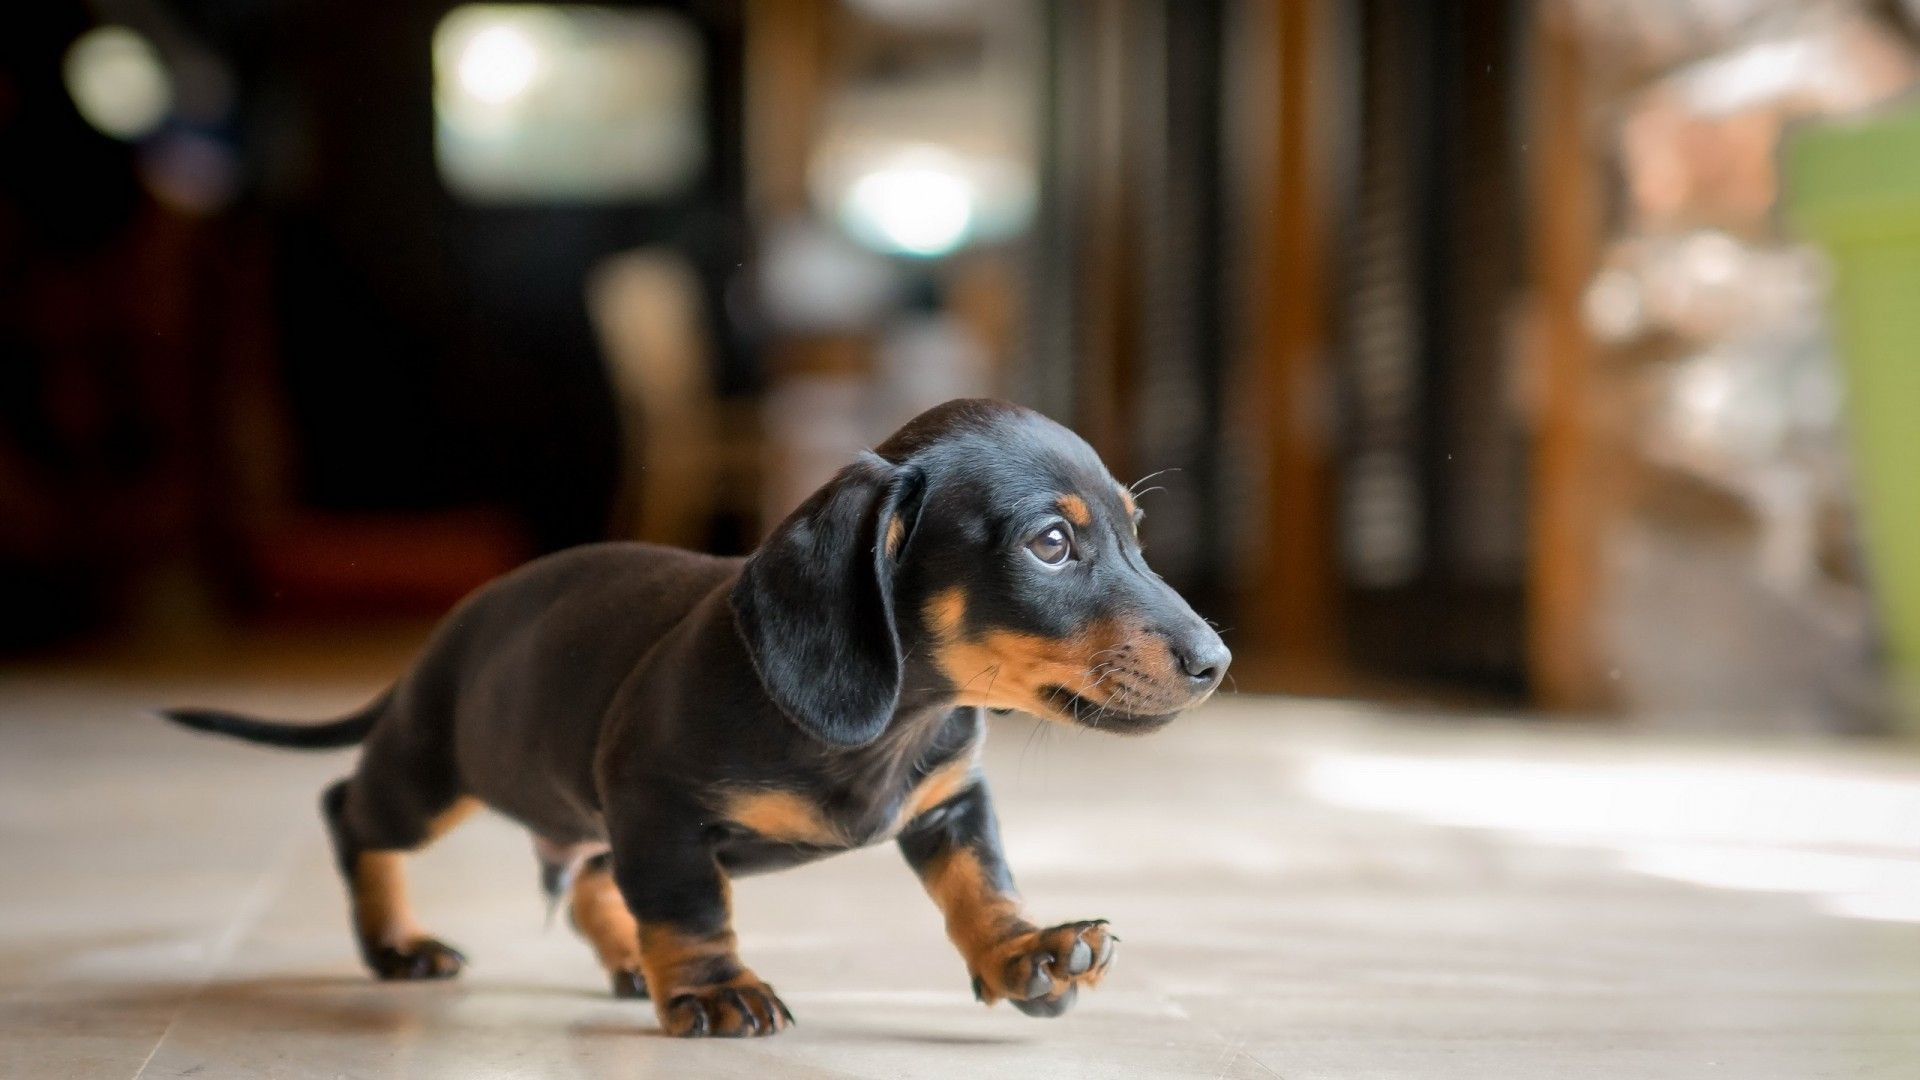 1920x1080 HD Wallpaper Of A Cute And Adorable Dachshund Puppy